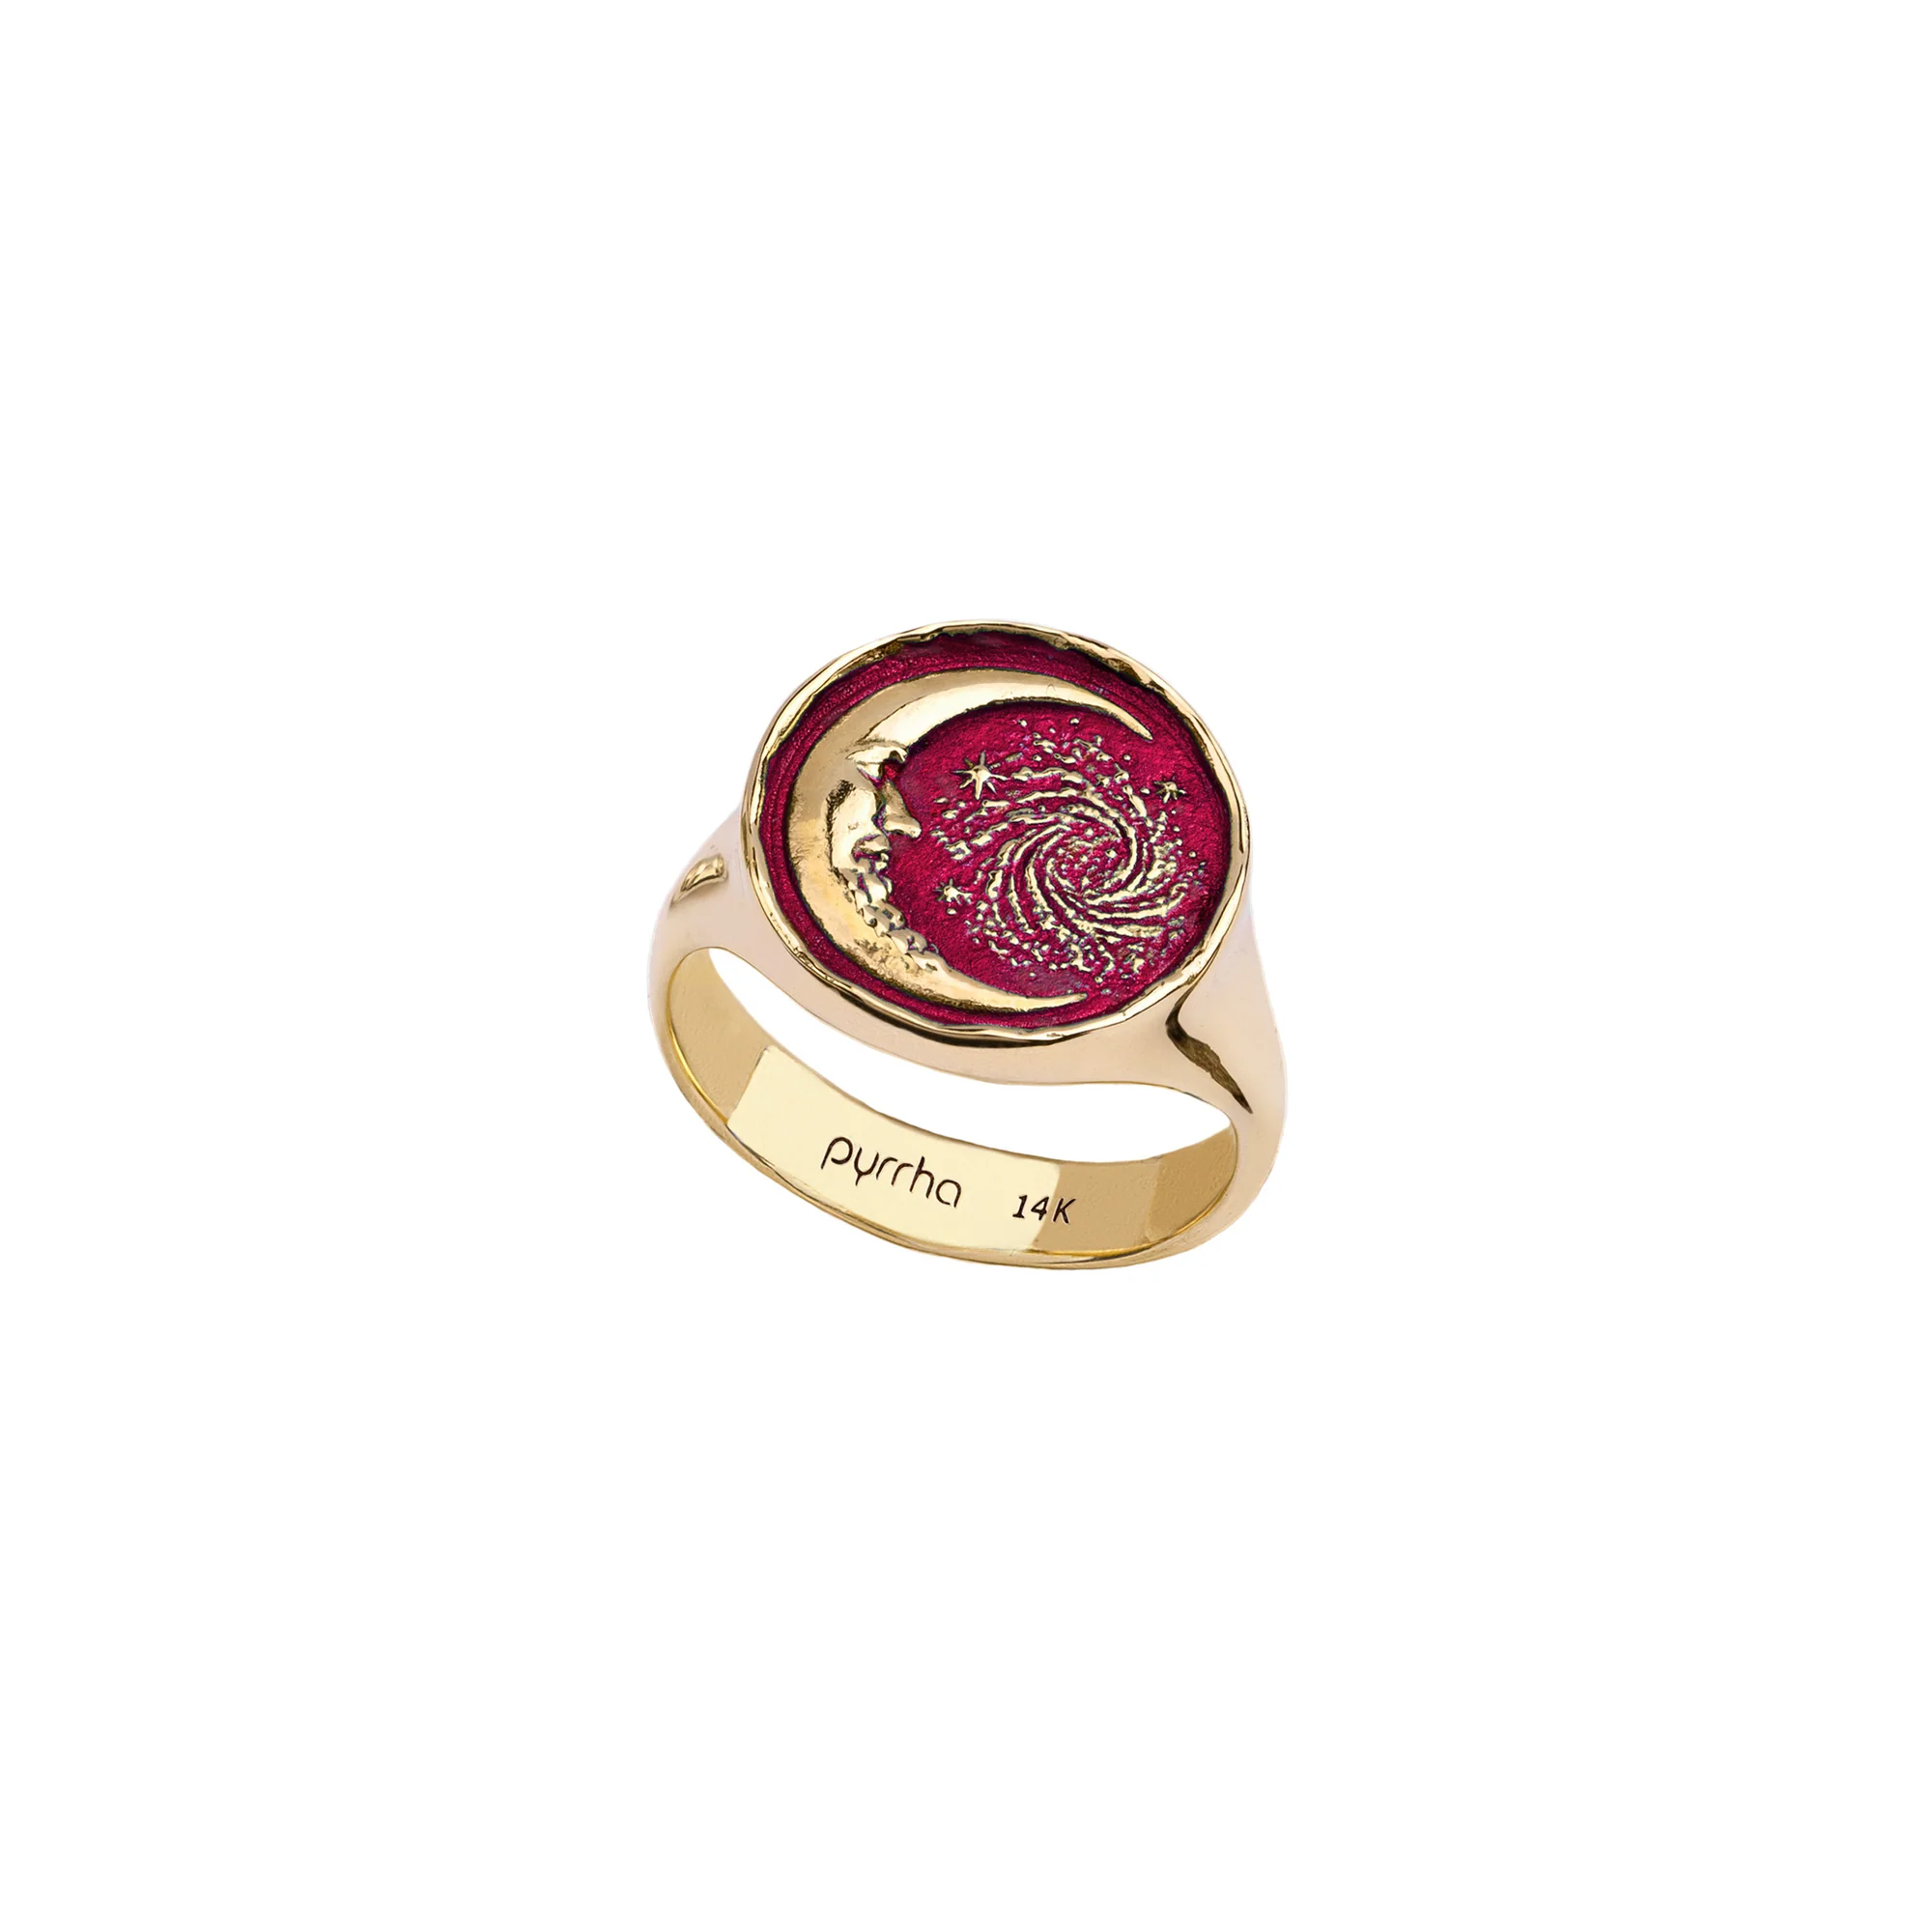 Trust the Universe 14K Gold Signet Ring - True Colors | Magpie Jewellery